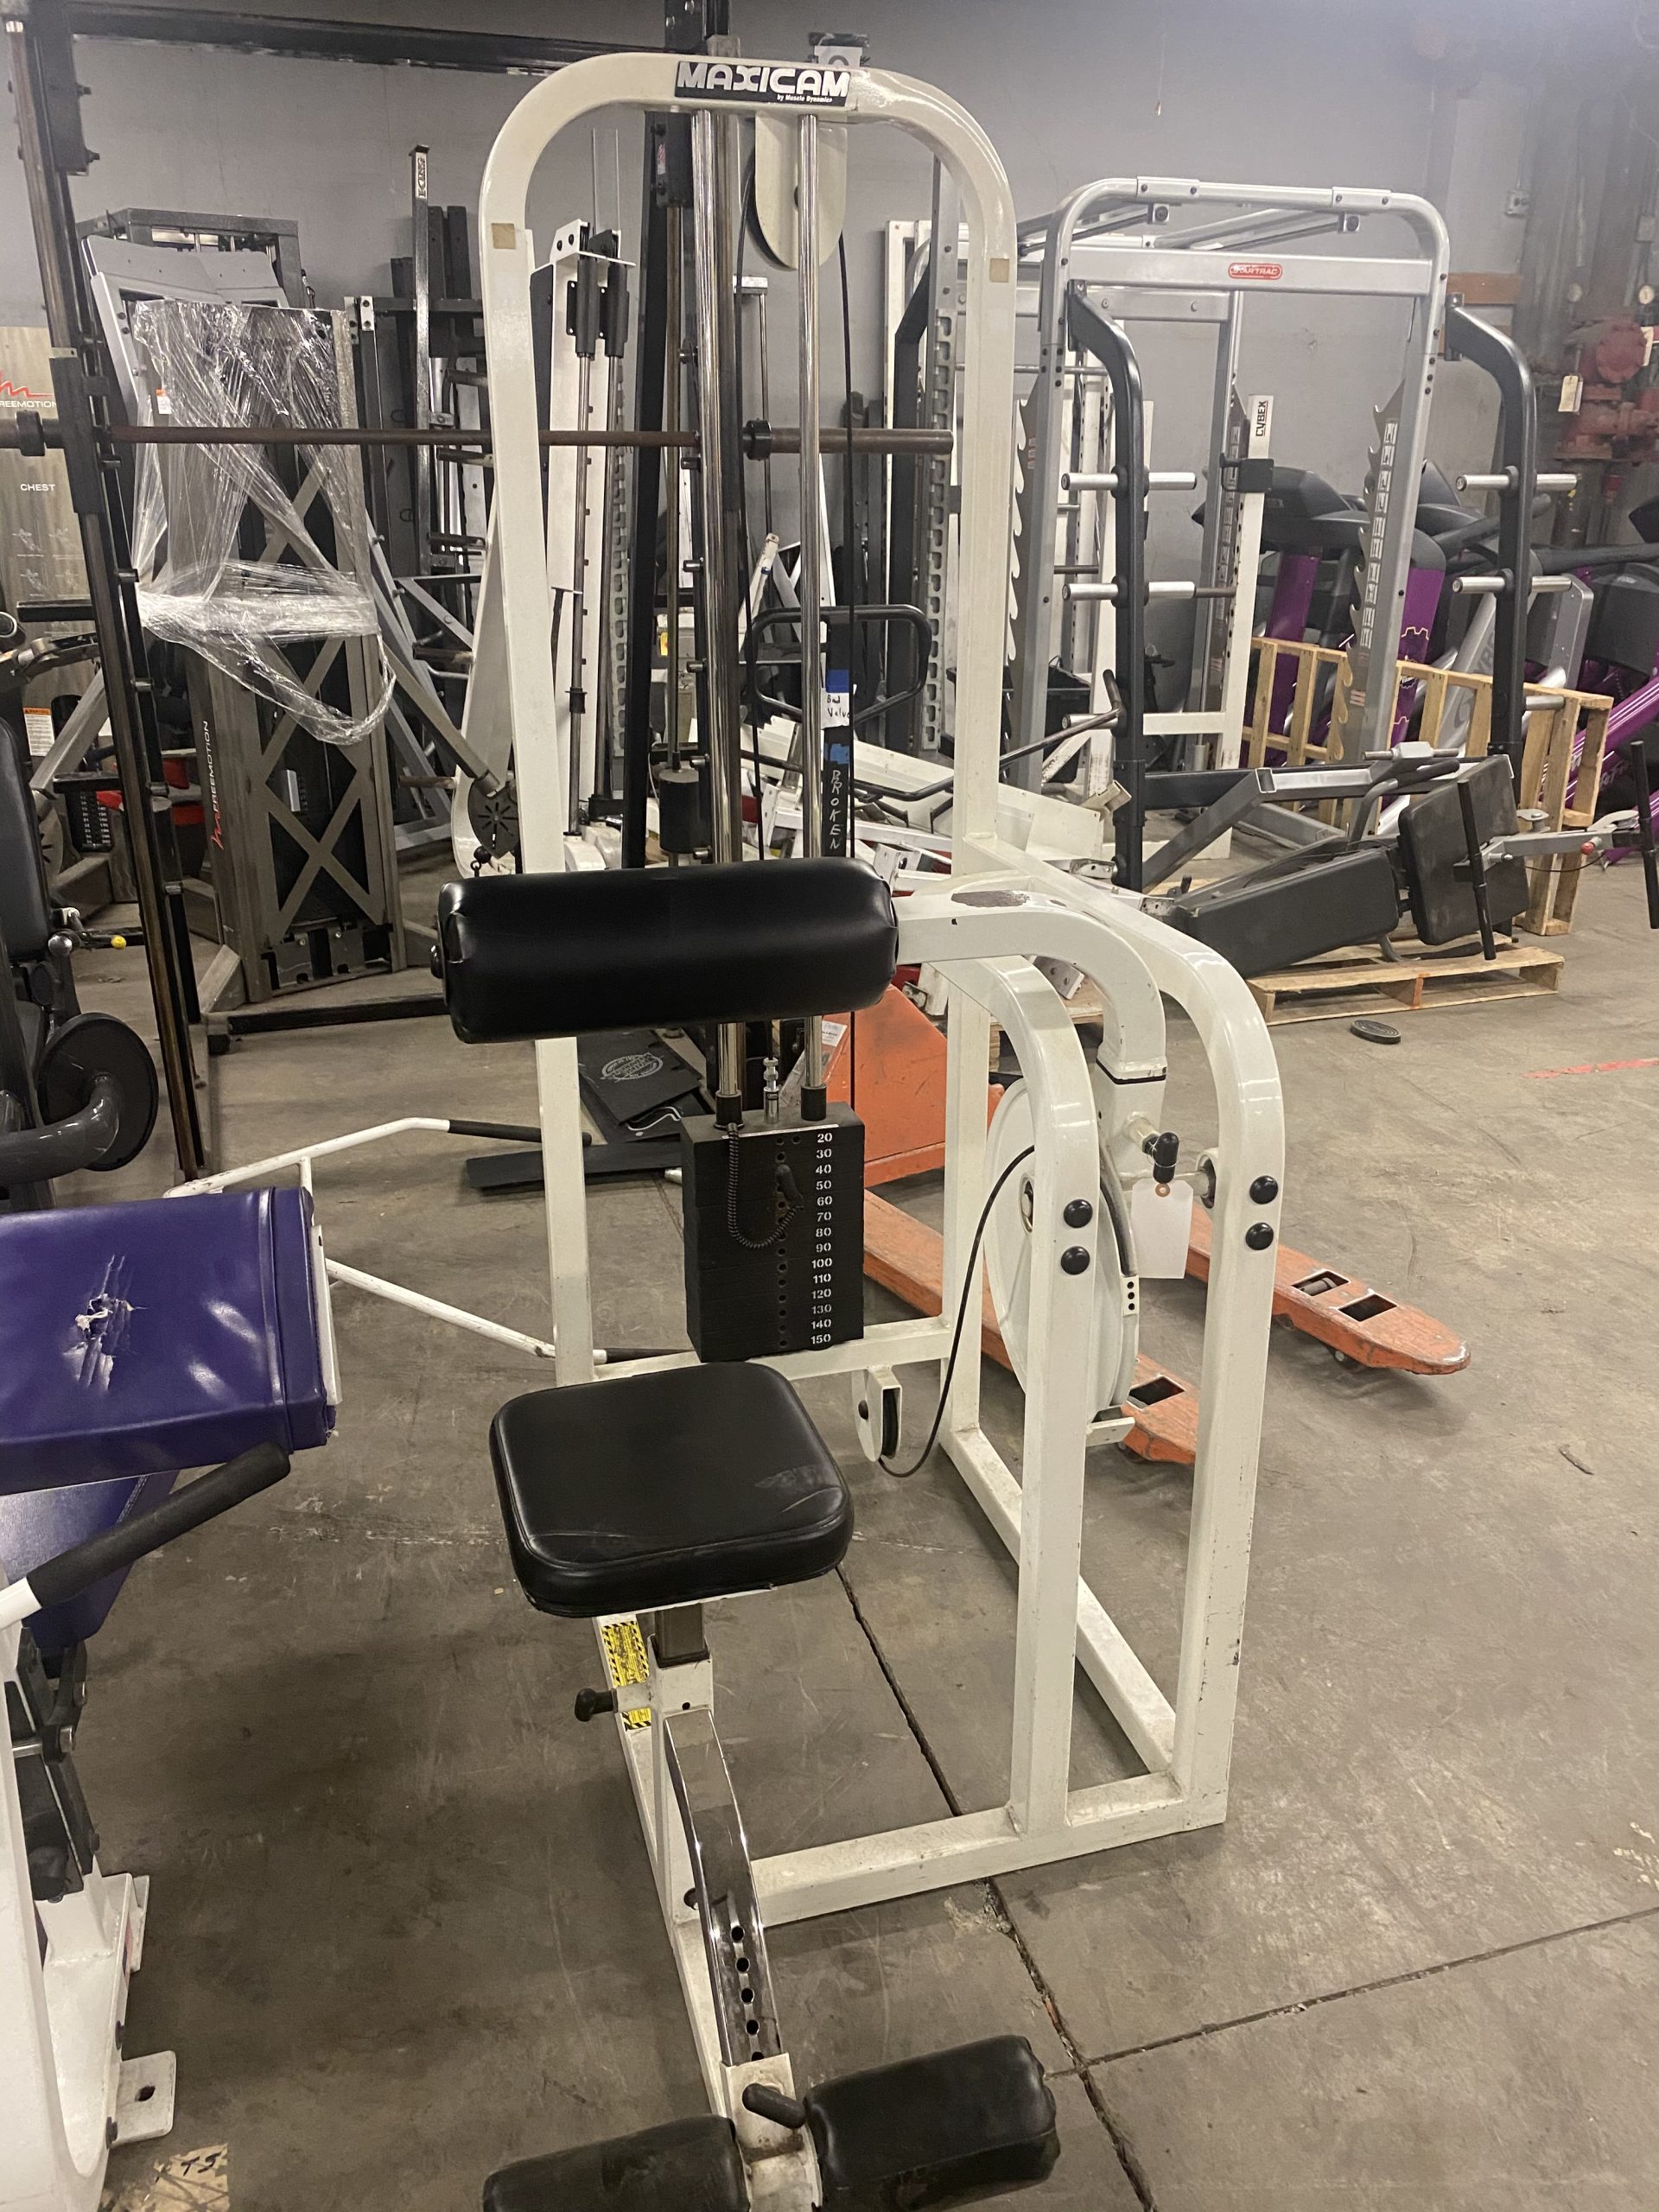 Free Motion Machines - Equipment - Strength - Products Fitness 1st